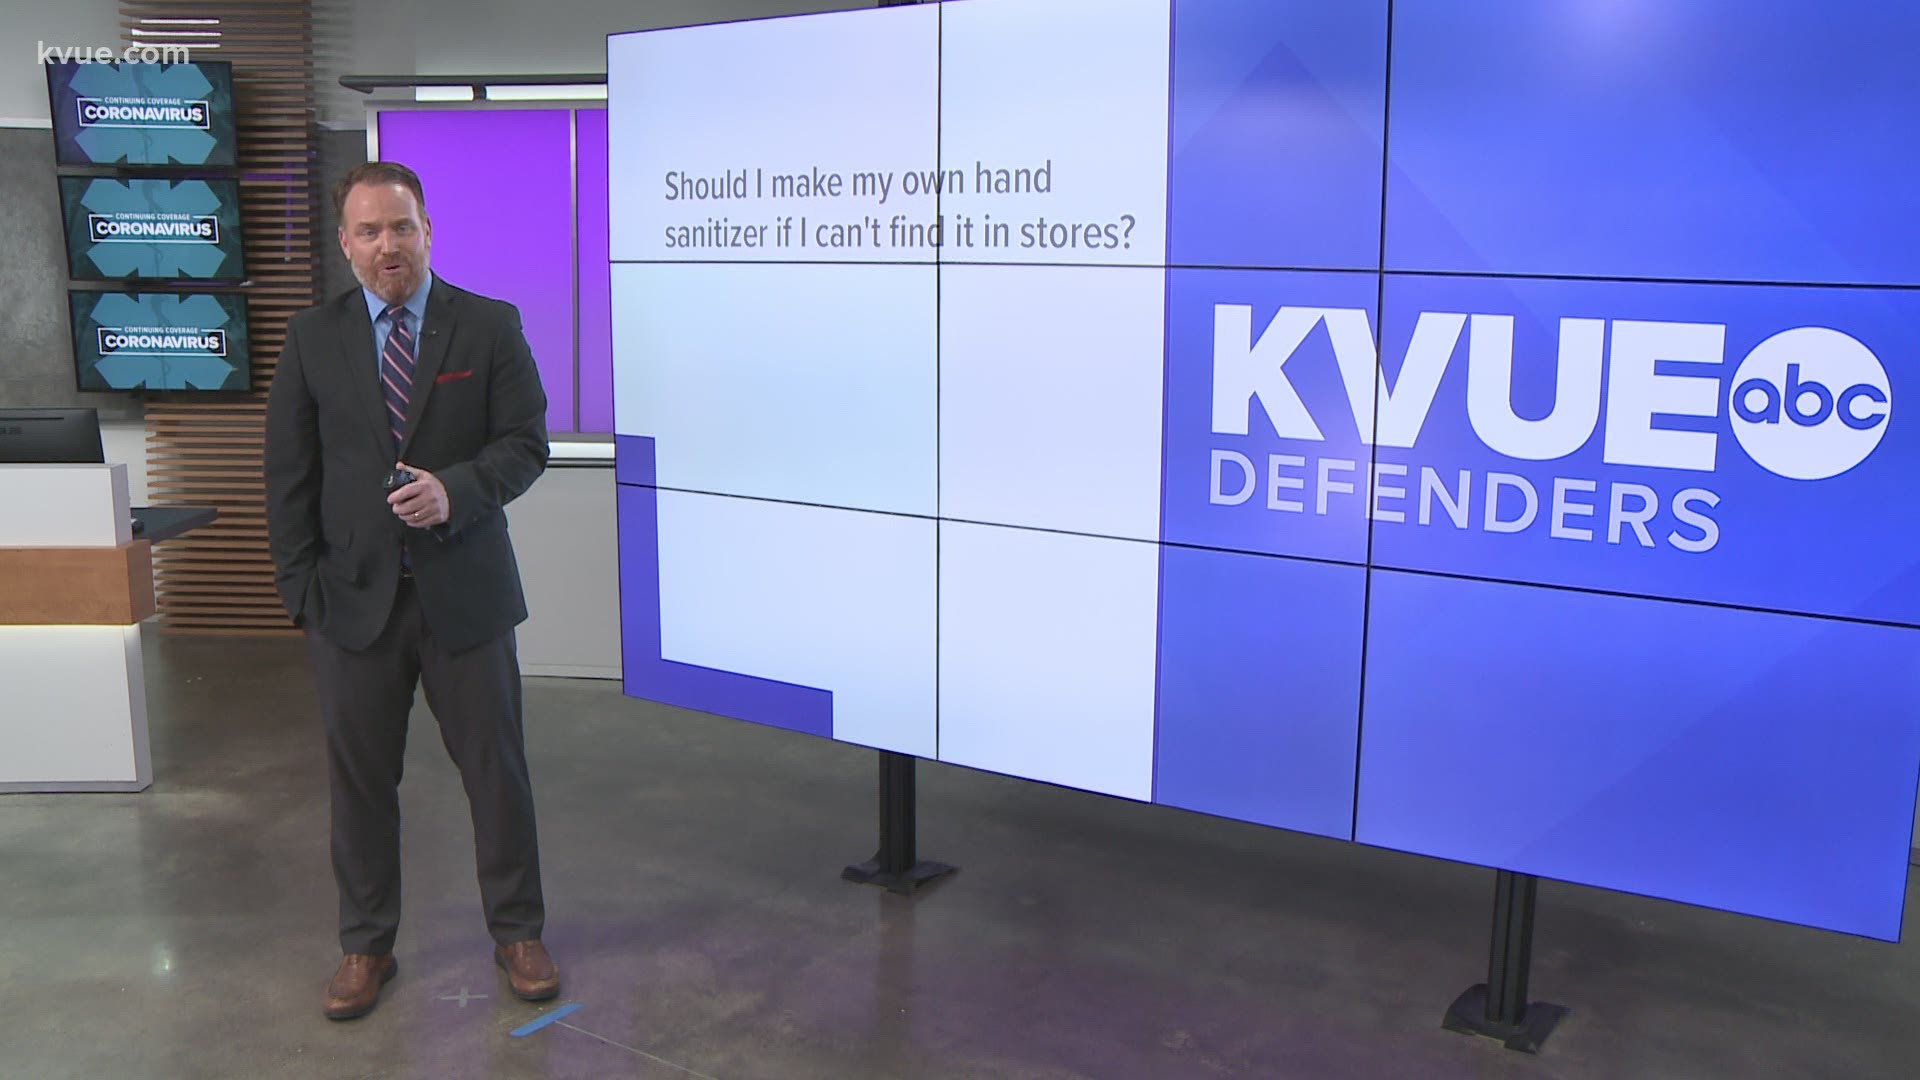 If you have a question you'd like KVUE to answer, text 512-459-9442.